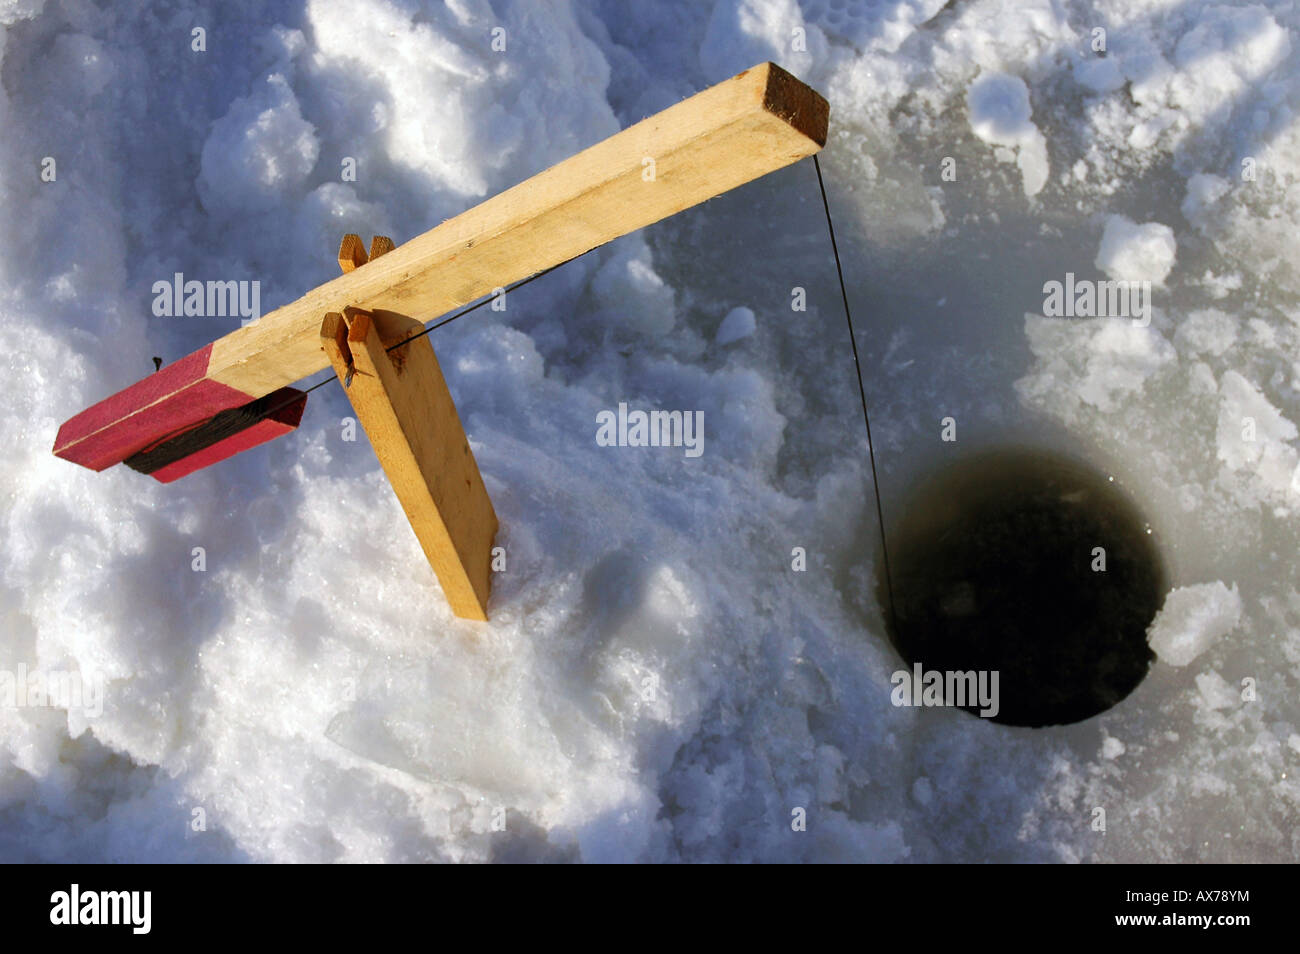 A trap setup for ice fishing on a river Stock Photo - Alamy